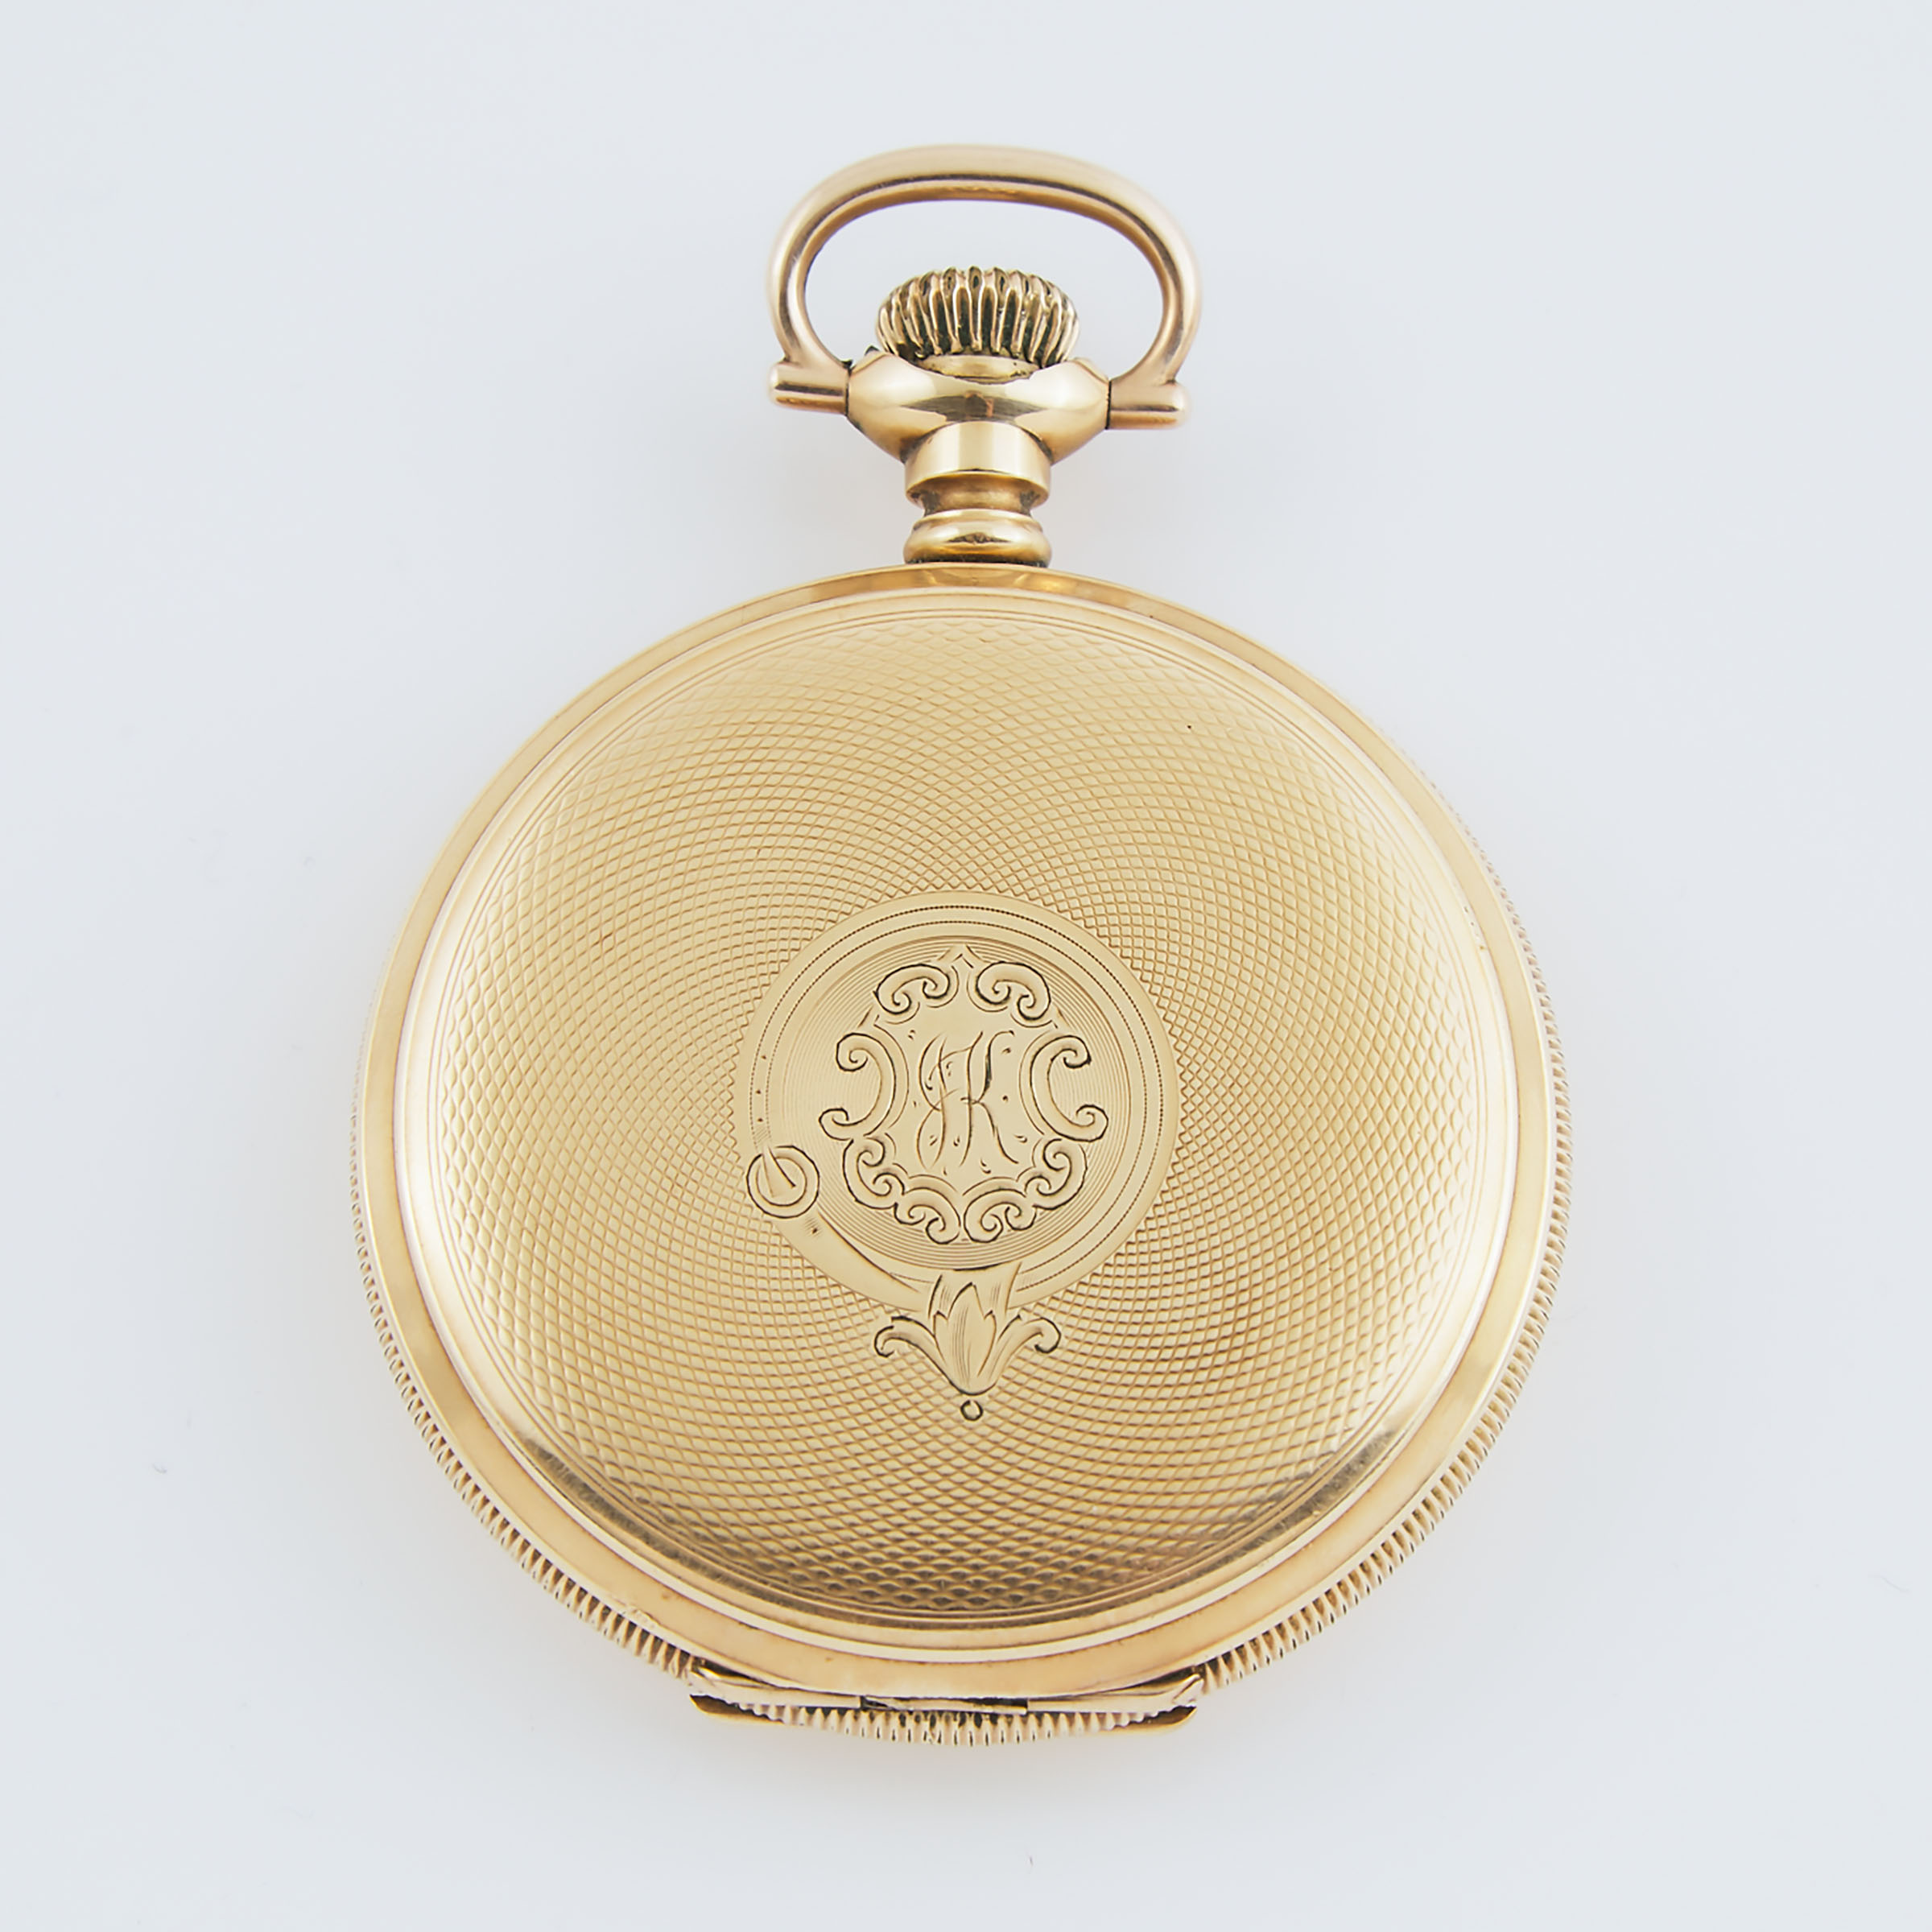 Savage & Co. Of Guelph, Ontario Stem Wind Pocket Watch